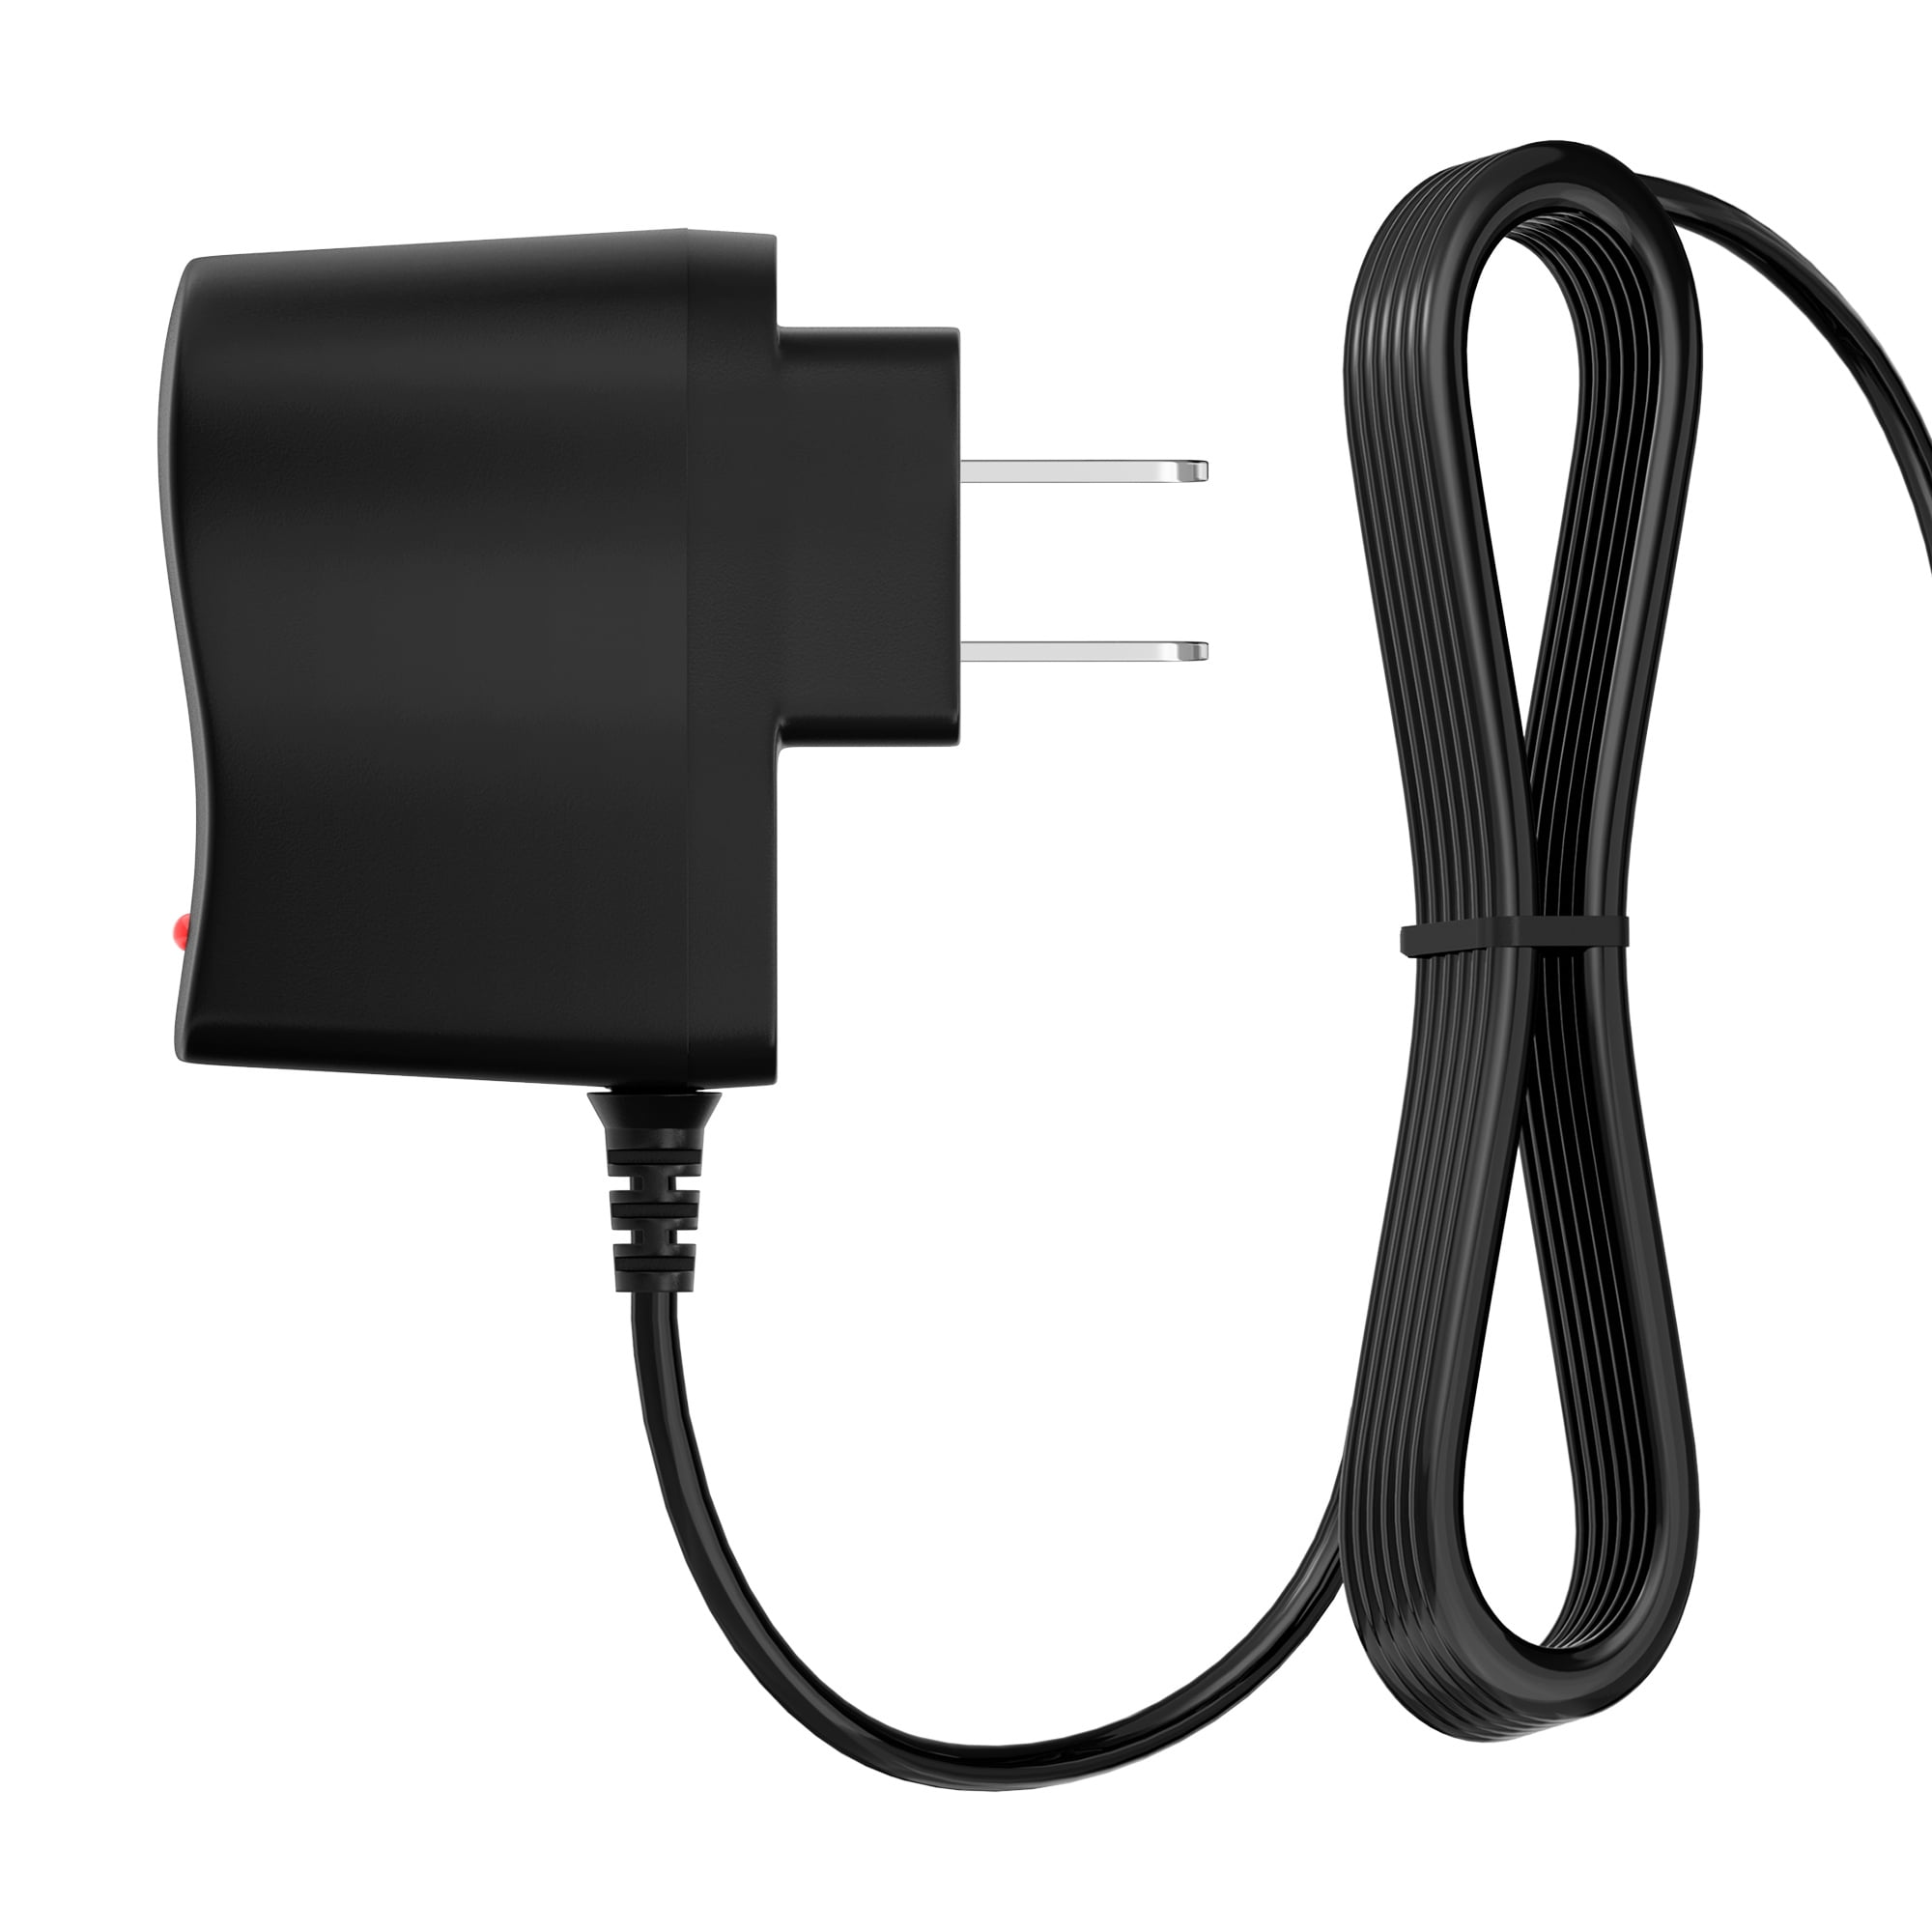 1A AC Power Charger Adapter Cord for GPS Nuvi 2797 LM/T 2757 LM/T - Walmart.com